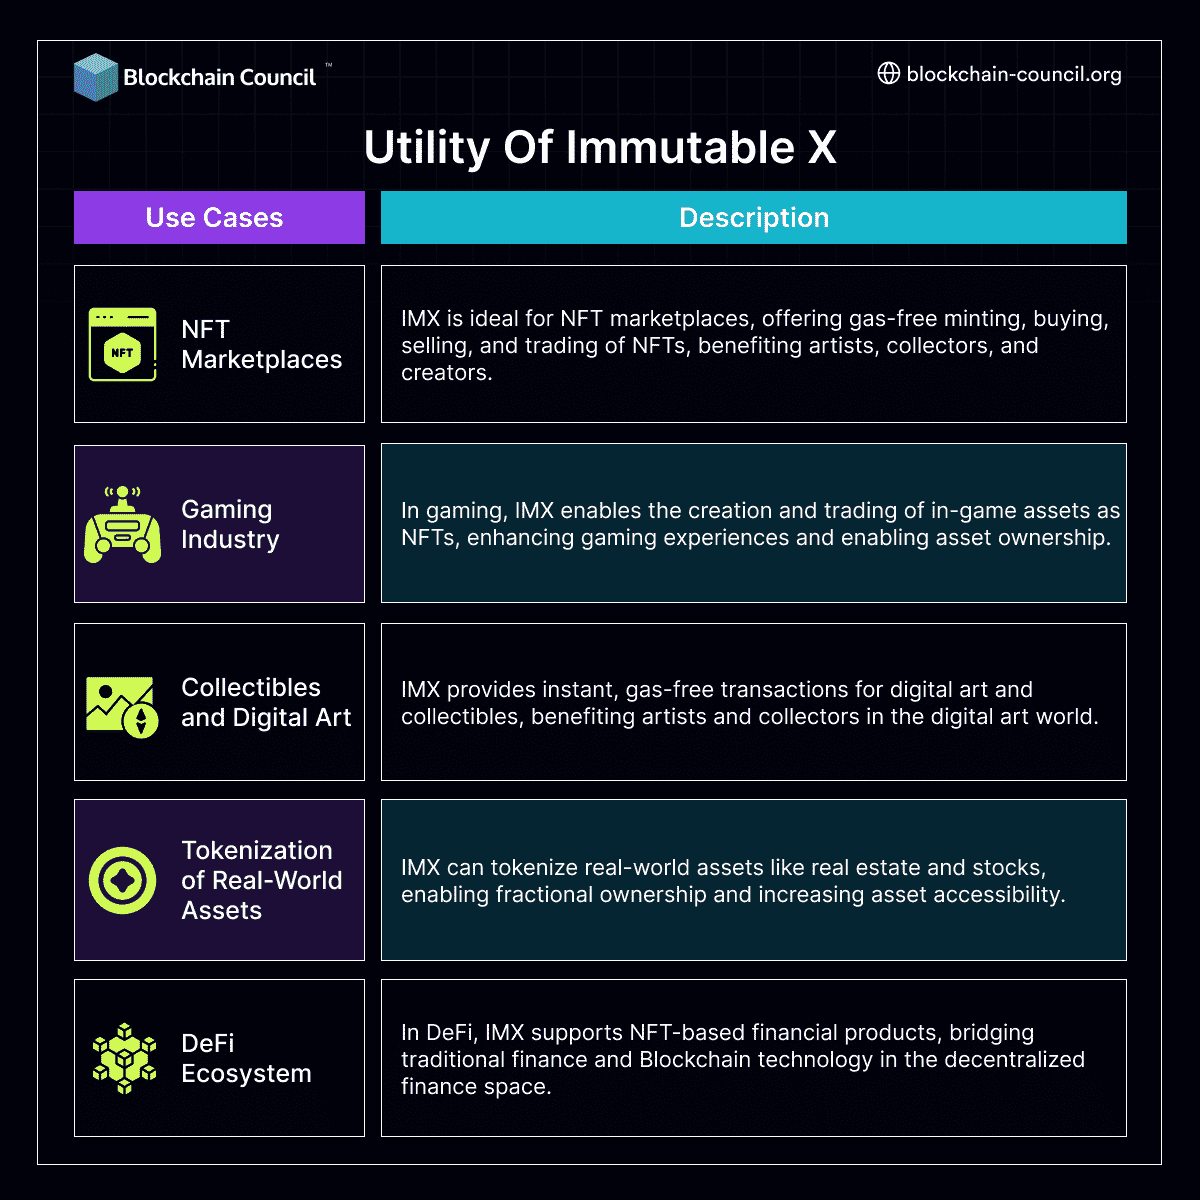 Utility and use cases